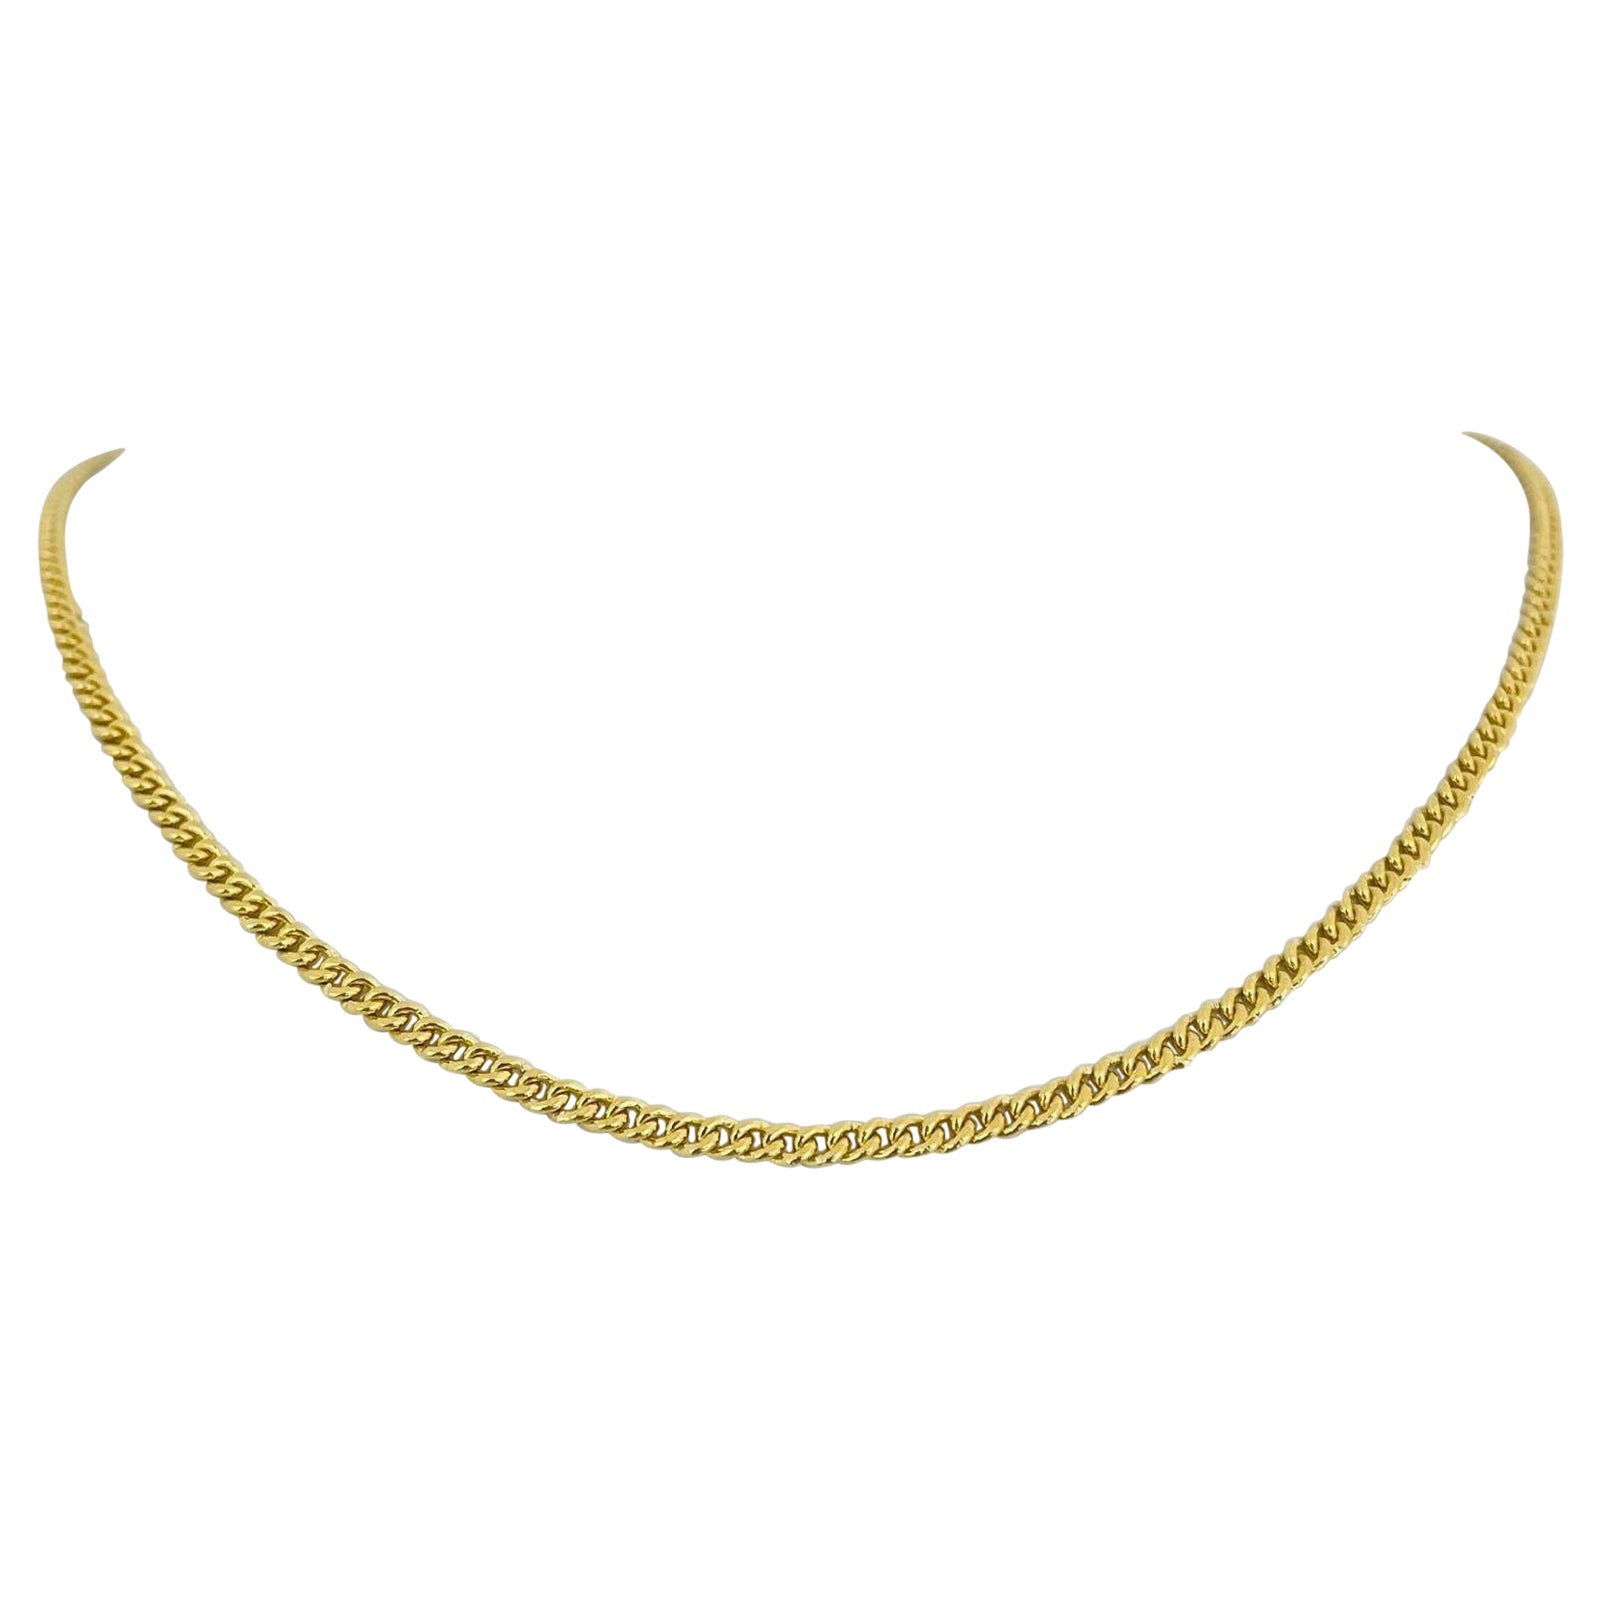 24 Karat Pure Yellow Gold Solid Curb Link Chain Necklace 